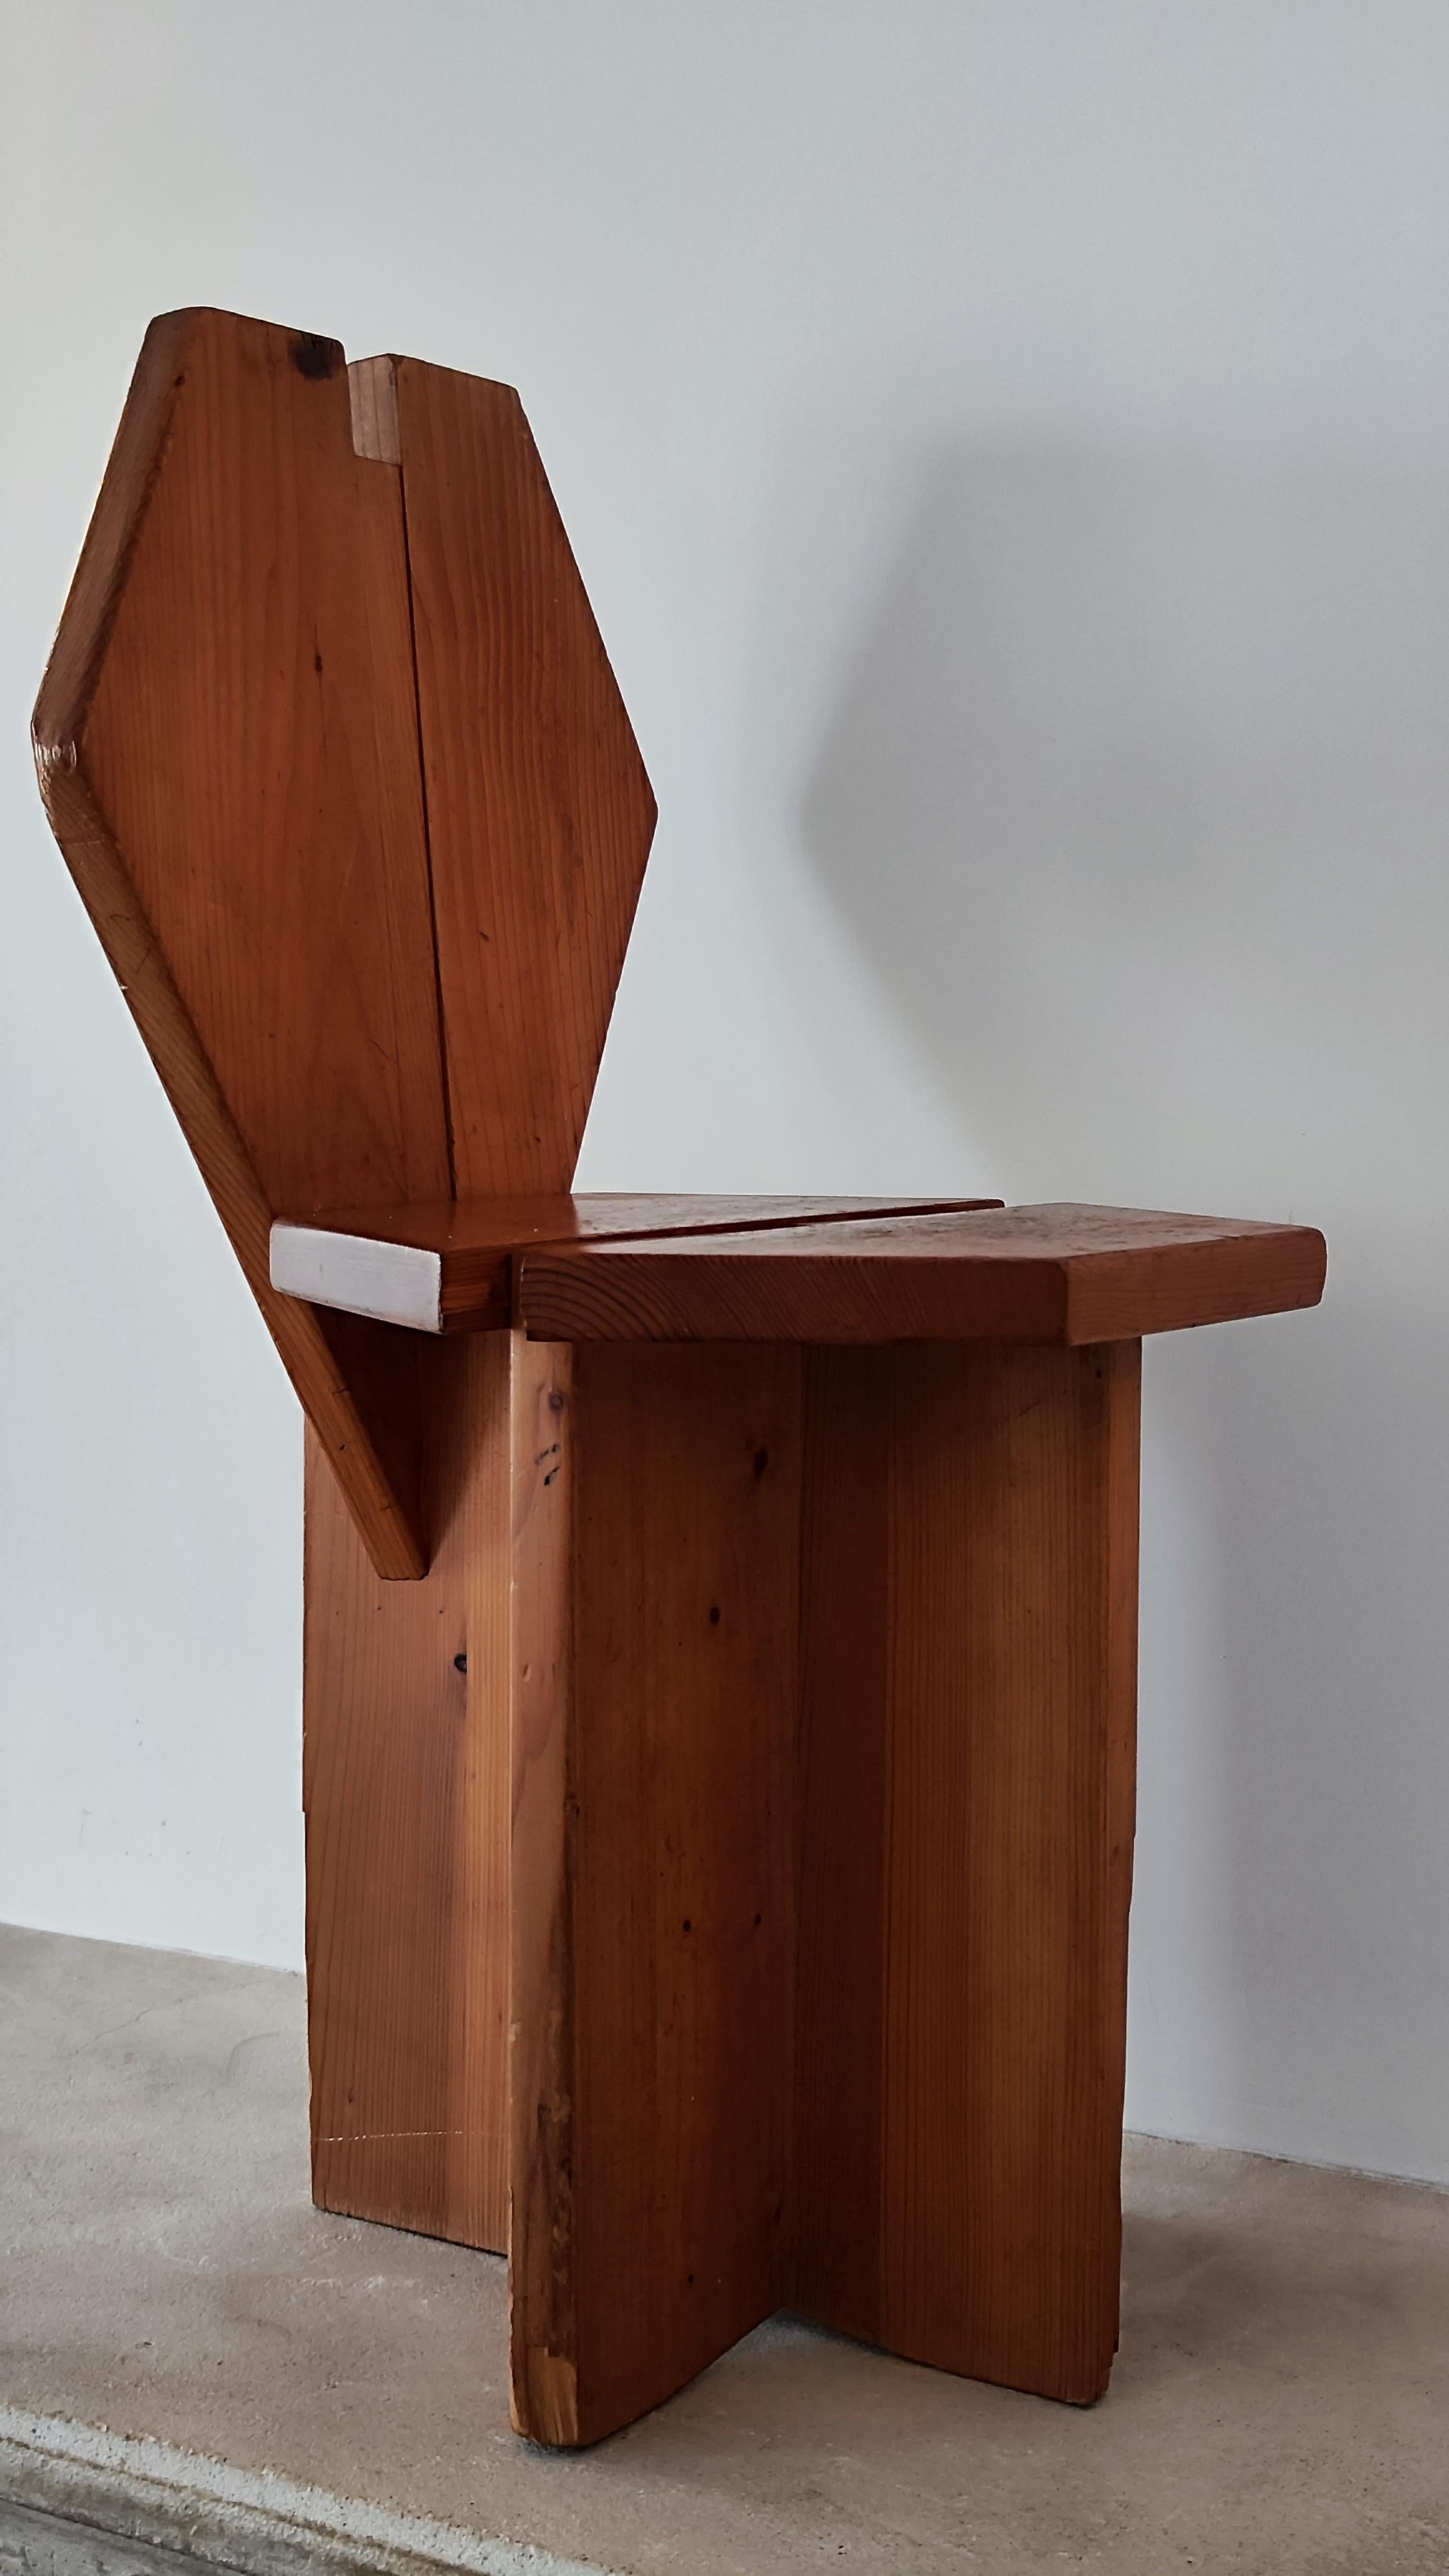 60s brutalist pine chair, France, Méribel - René Martin for Charlotte Perriand 1